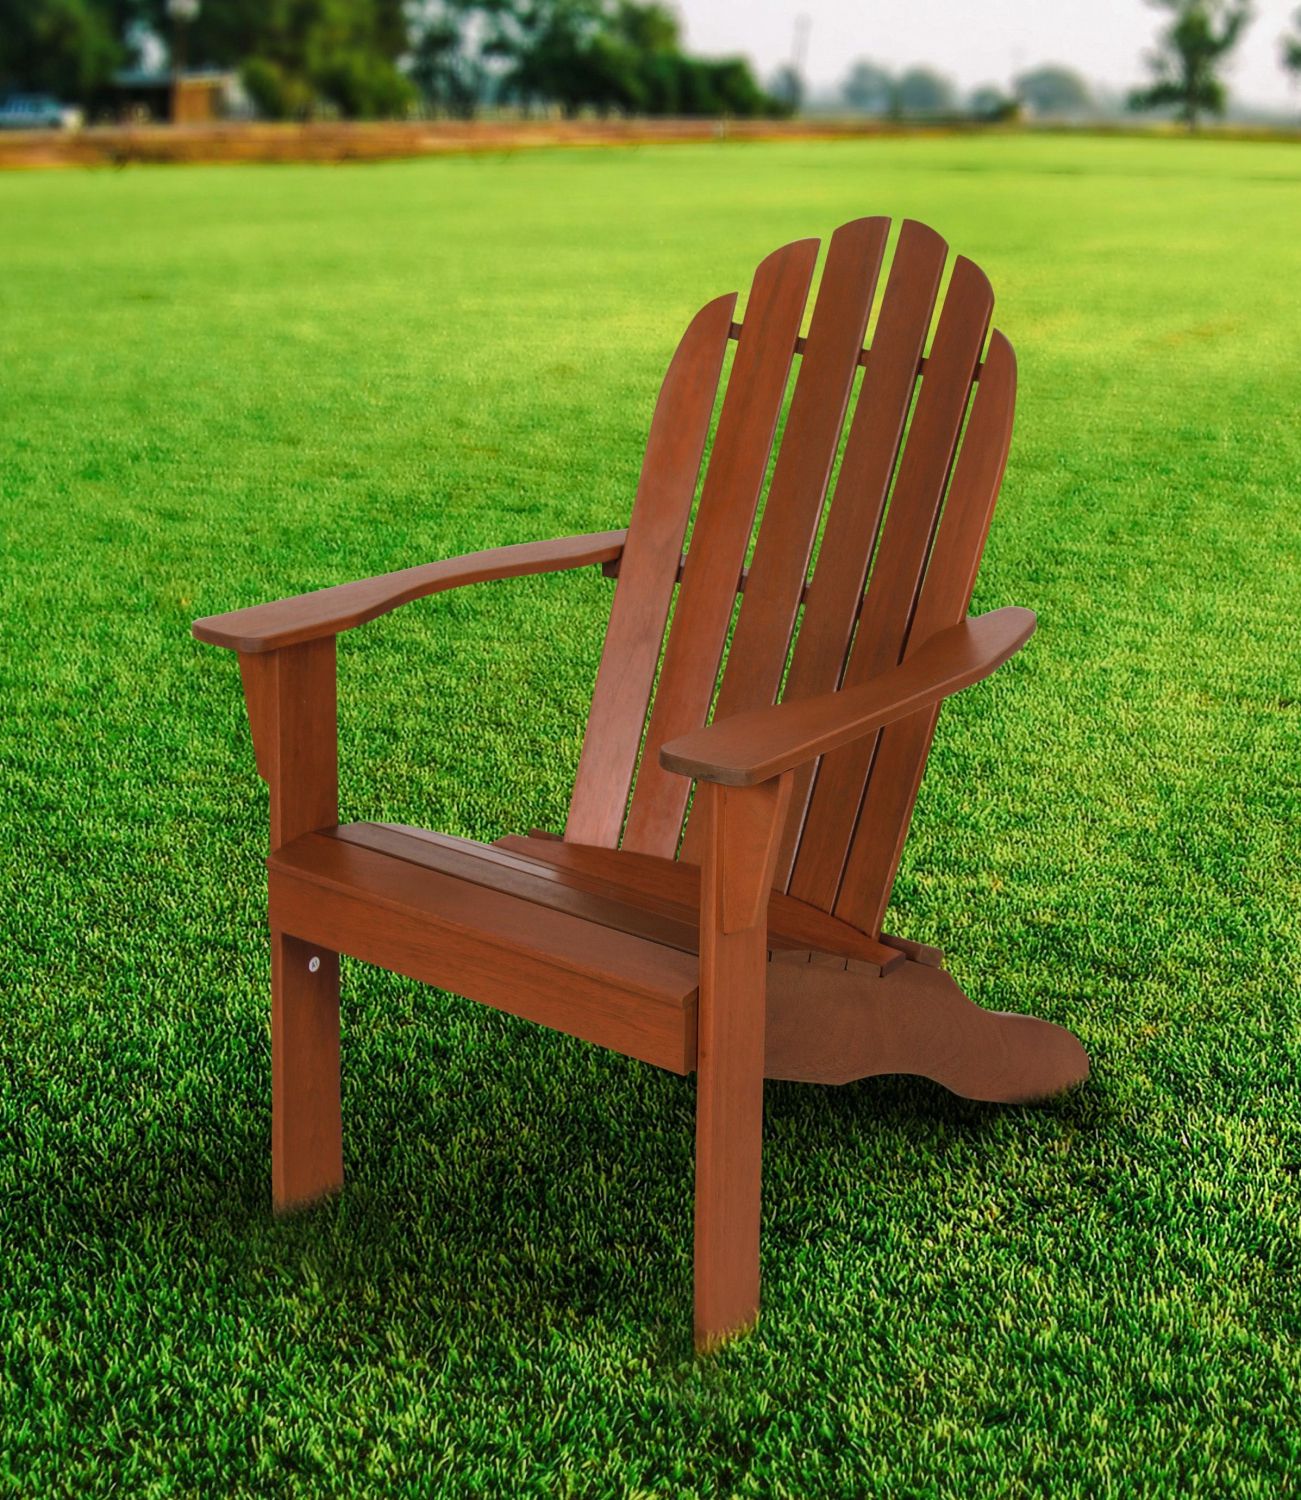 Wooden Adirondack Chair Outdoor Patio Furniture Lounge Seat Deck Pool 7 Throughout Wood Outdoor Armchair Sets (View 3 of 15)